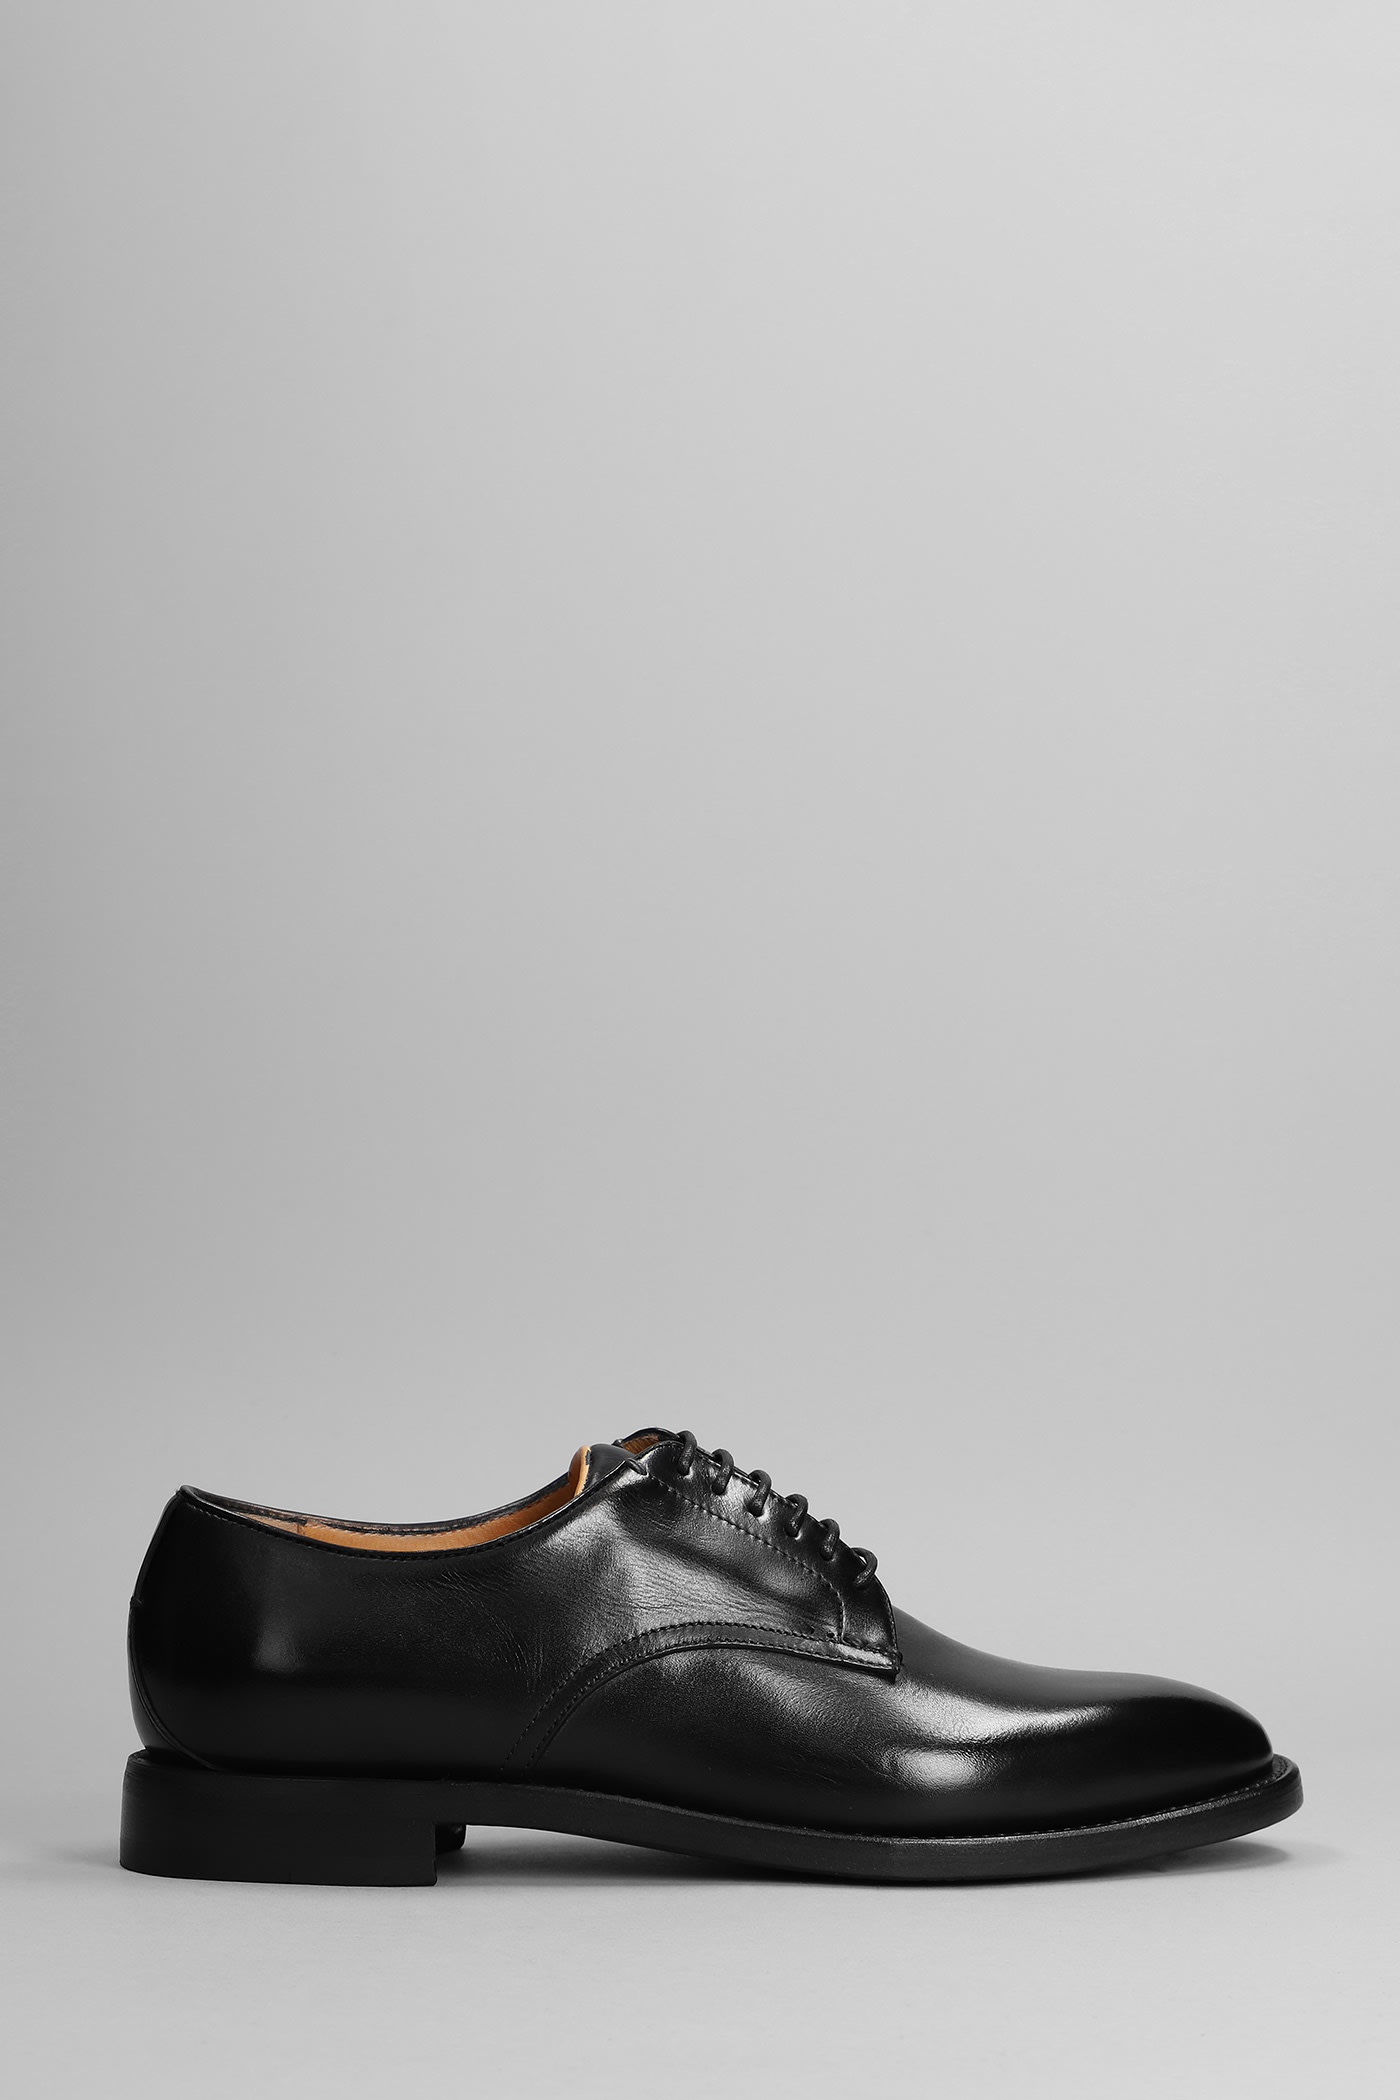 Silvano Sassetti Lace Up Shoes In Black Leather